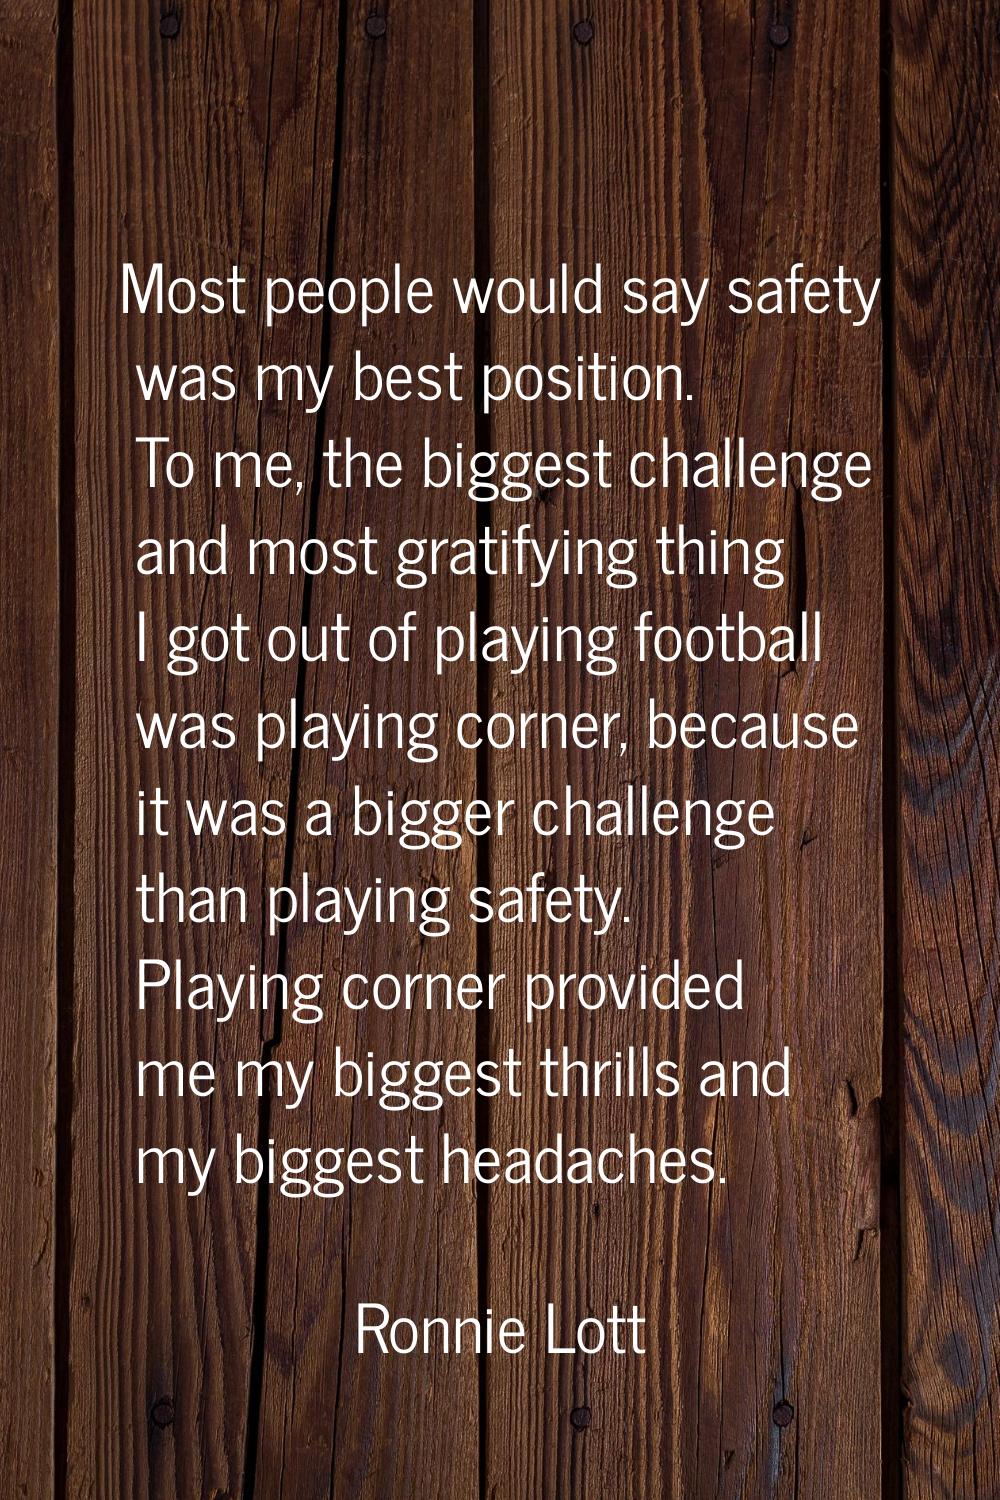 Most people would say safety was my best position. To me, the biggest challenge and most gratifying